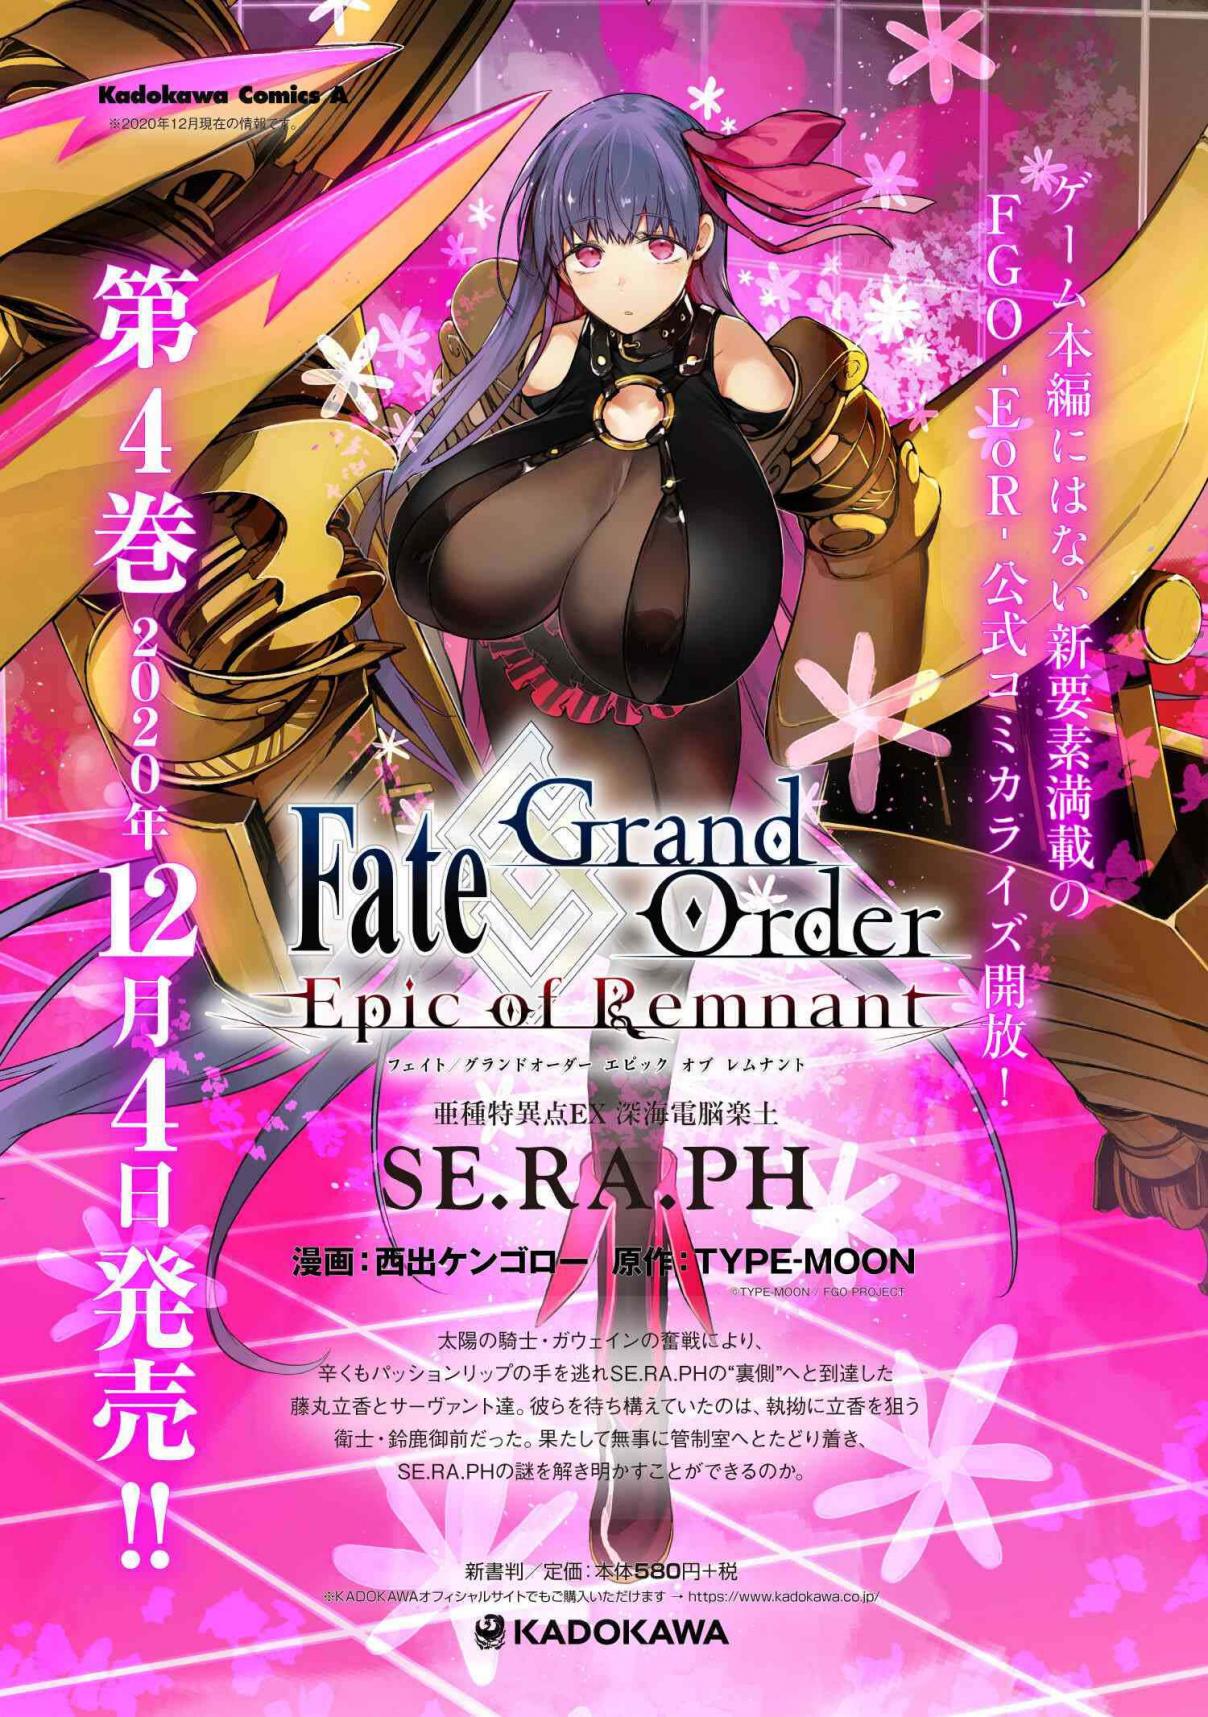 Fate/Grand Order -Epic of Remnant- Deep Sea Cyber-Paradise, SE.RA.PH 18.2